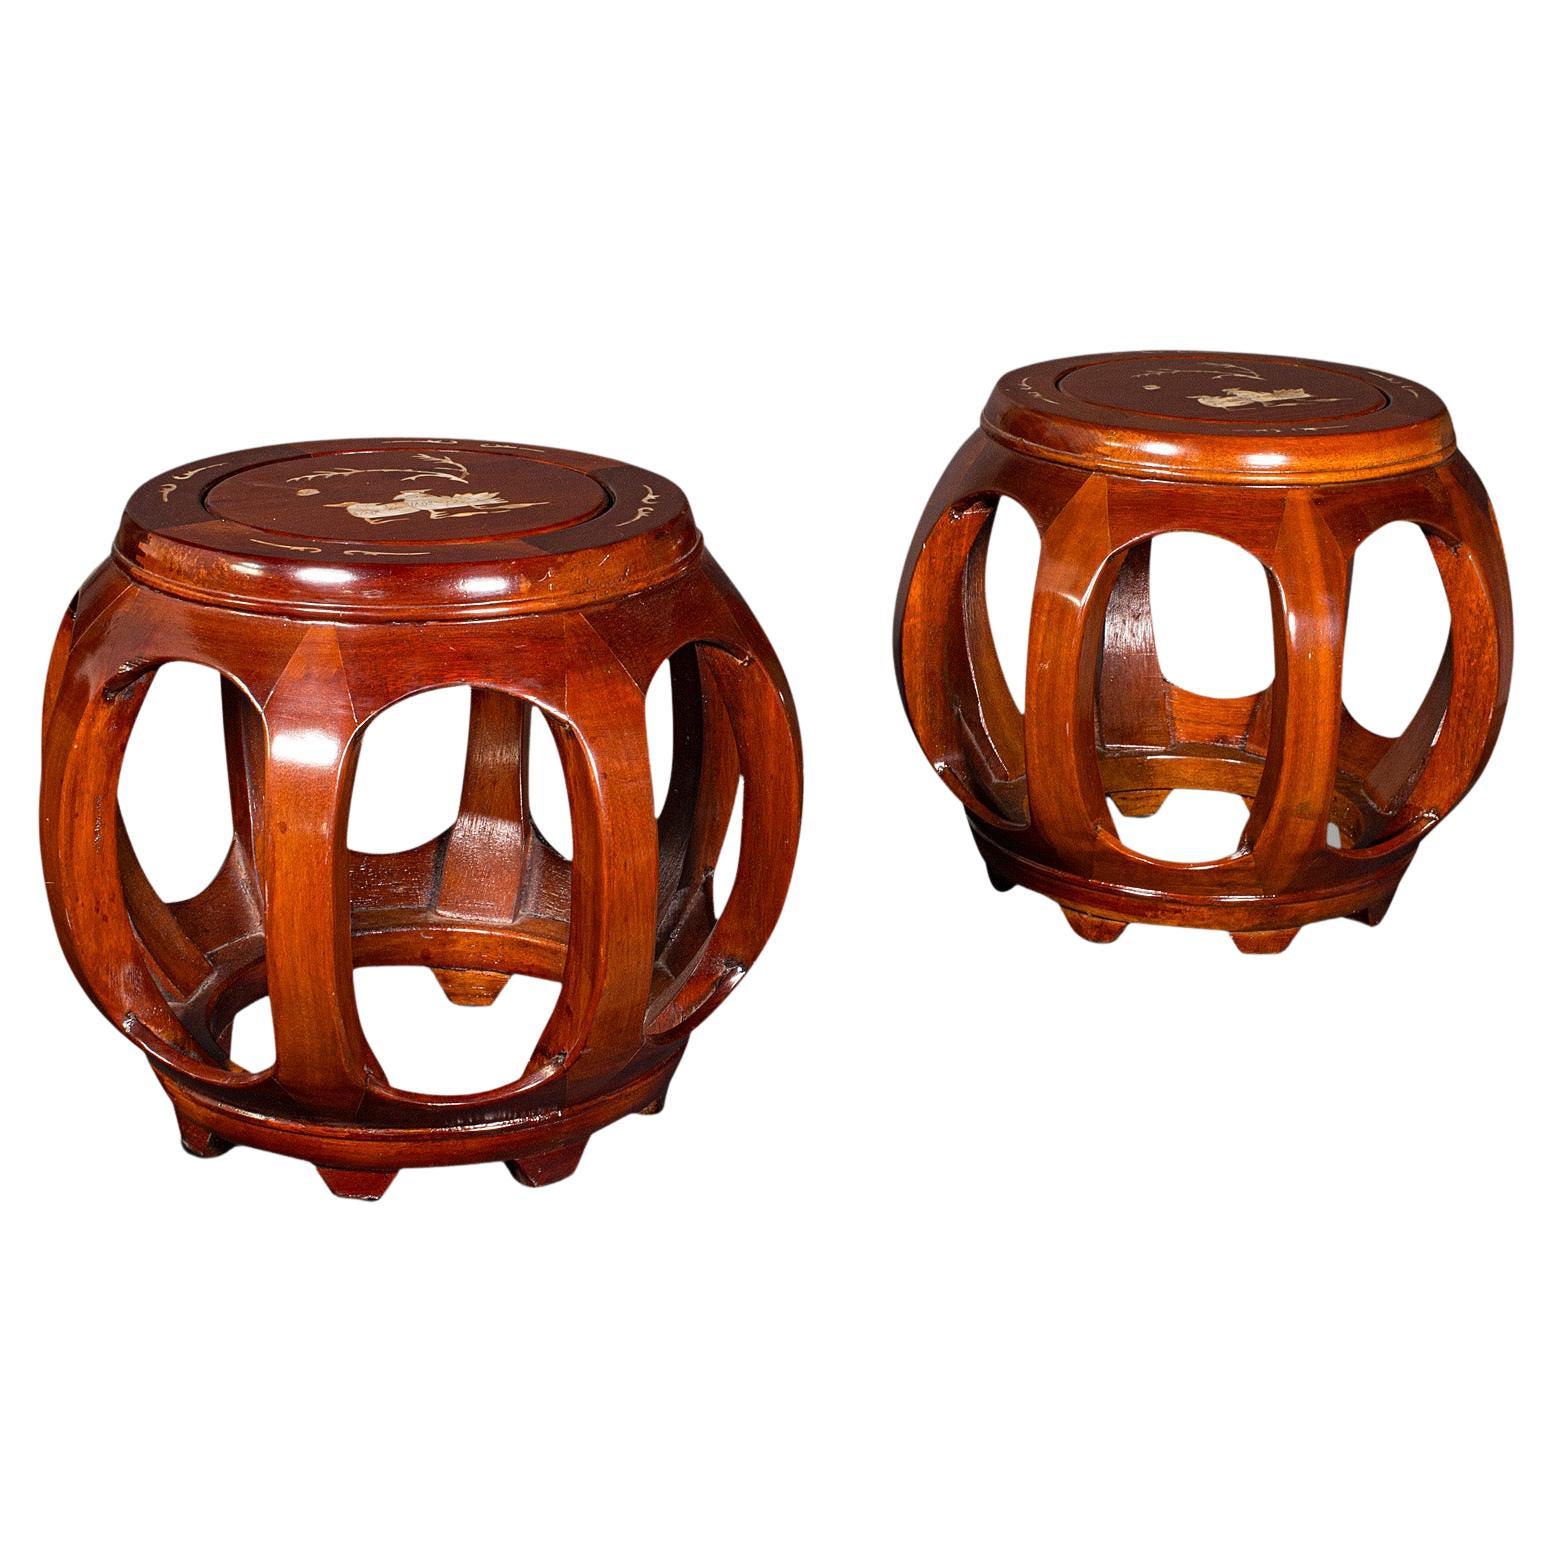 Pair Of Vintage Barrel Stools, Chinese, Inlaid, Decorative Display Stand, C.1970 For Sale